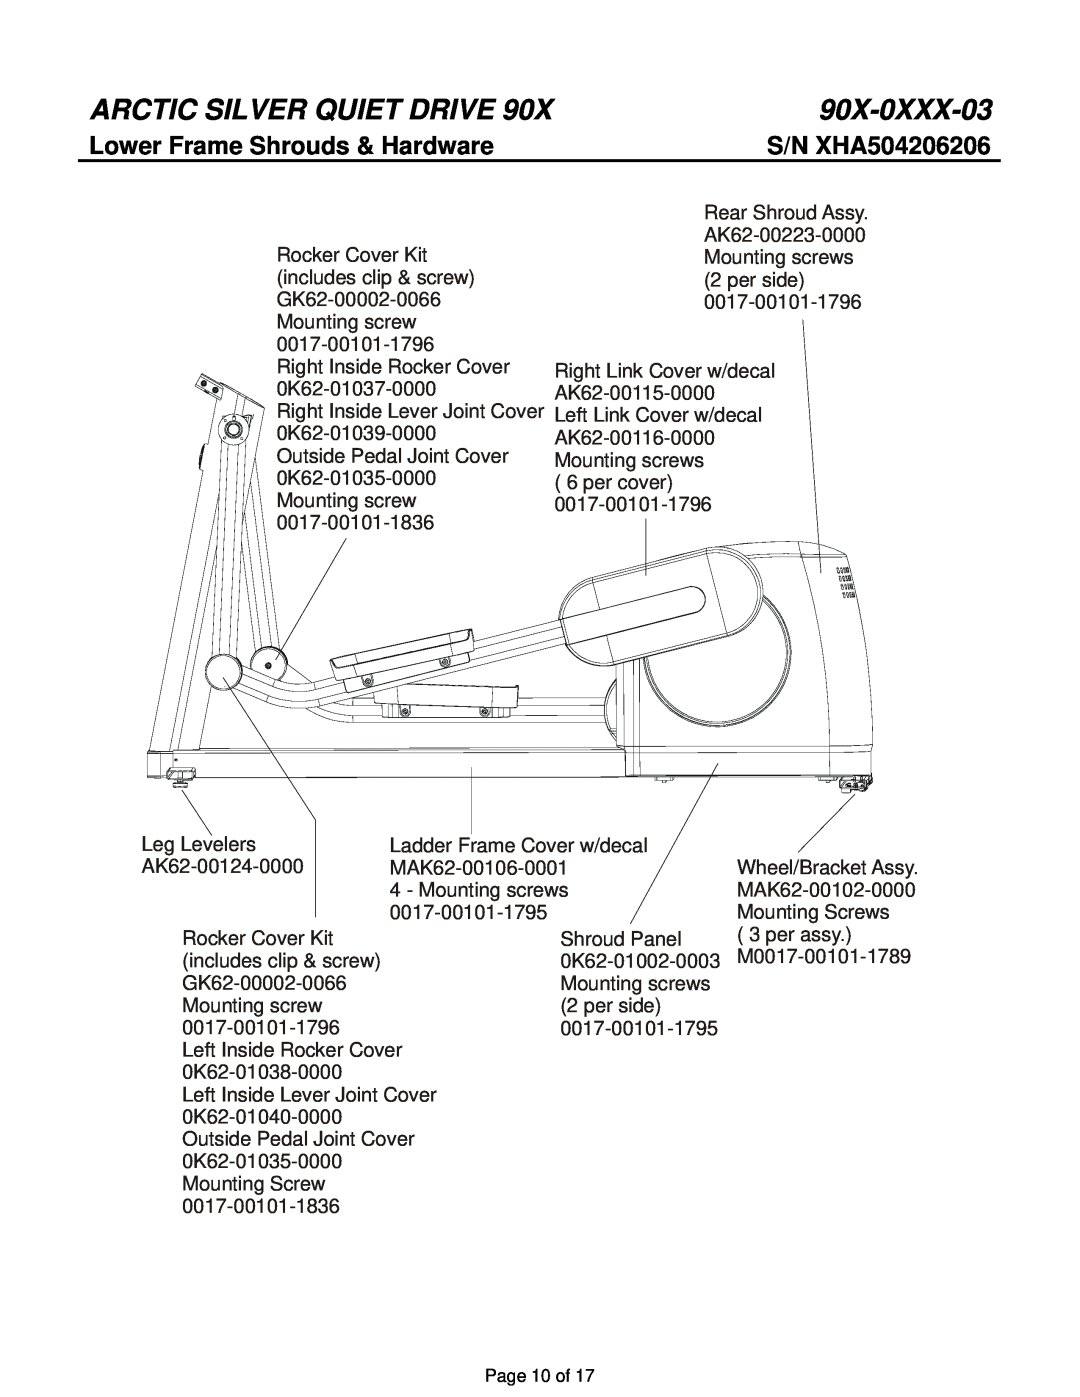 Life Fitness 90X-0XXX-03 manual Arctic Silver Quiet Drive, Lower Frame Shrouds & Hardware, S/N XHA504206206, Page 10 of 